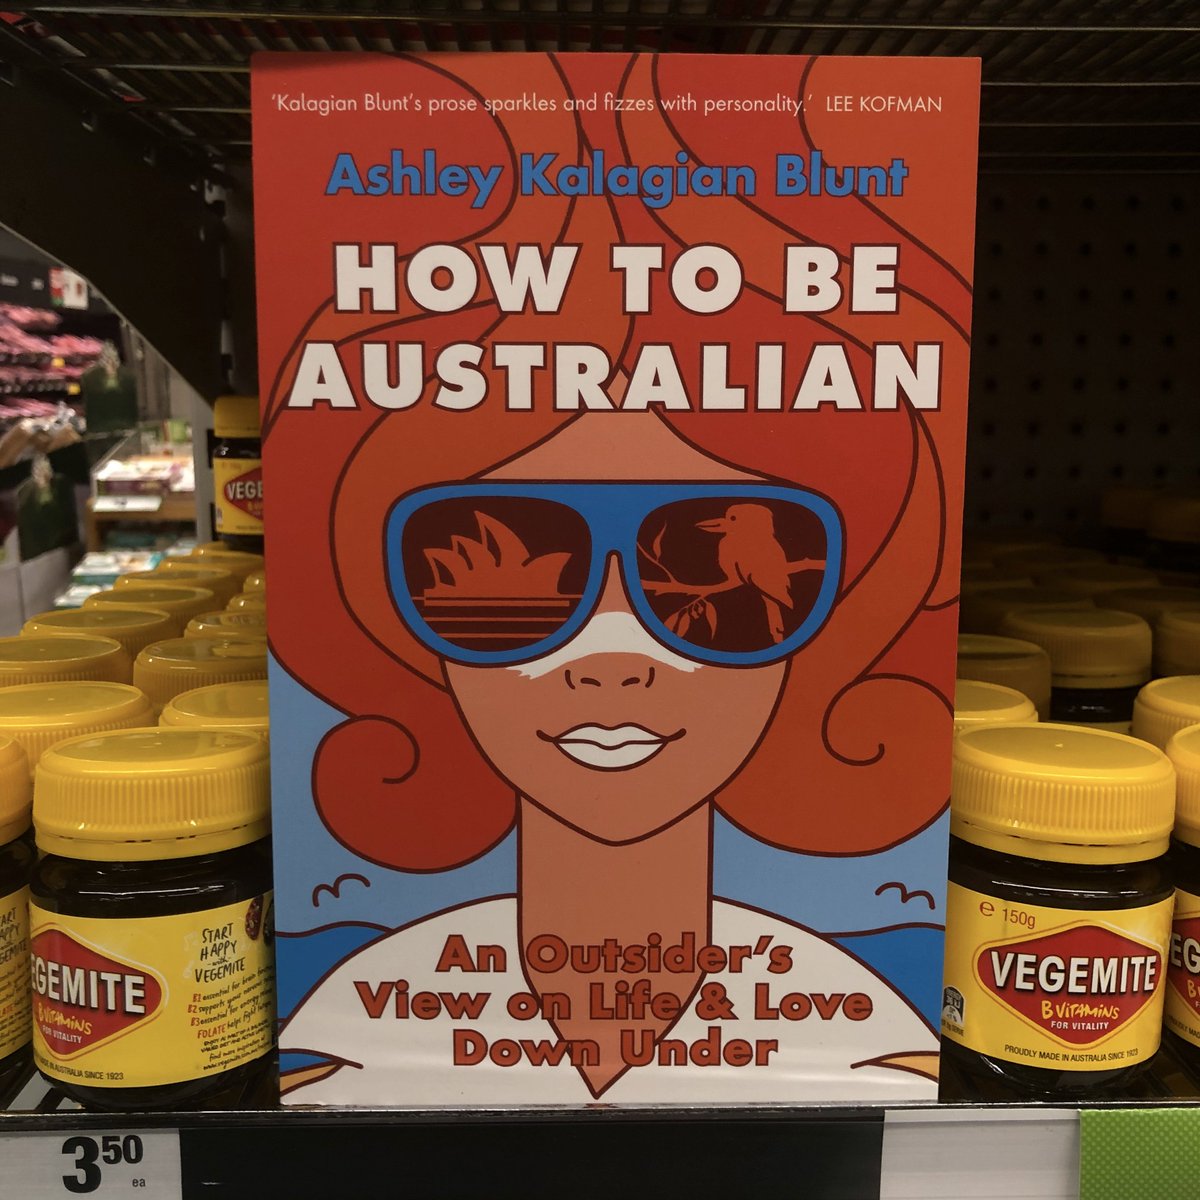 How to be Australian by Ashley Kalagian Blunt  @AffirmPress There's so much to love about this creative nonfiction memoir by  @AKalagianBlunt: it's consistently funny and insightful while also dealing with major themes such as isolation and anxiety. A wonderful read.